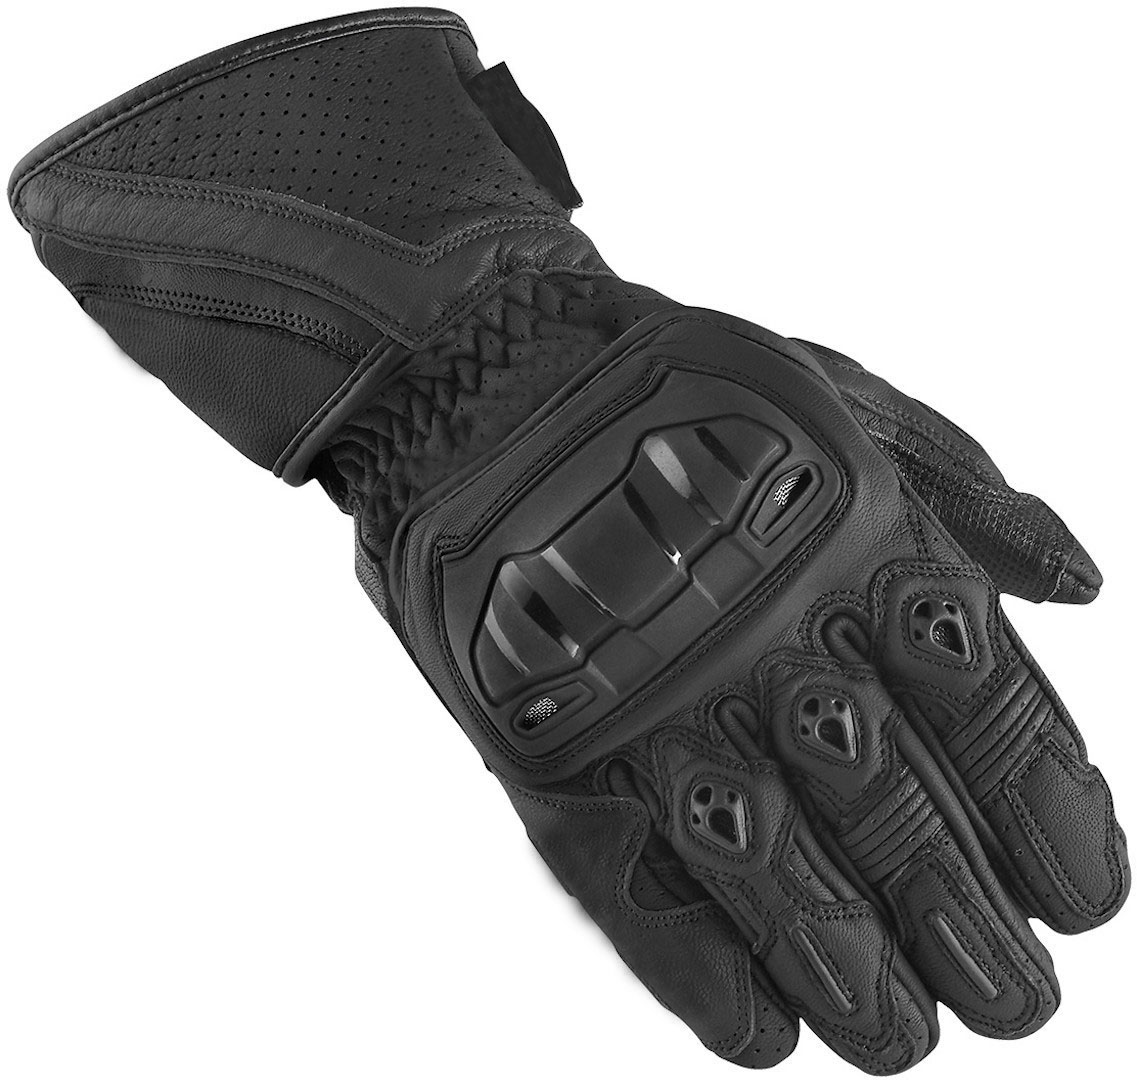 Good Vintage Motorcycle Gloves Breathable Comfortable Durable Padded Leather Anti Vibration Personal